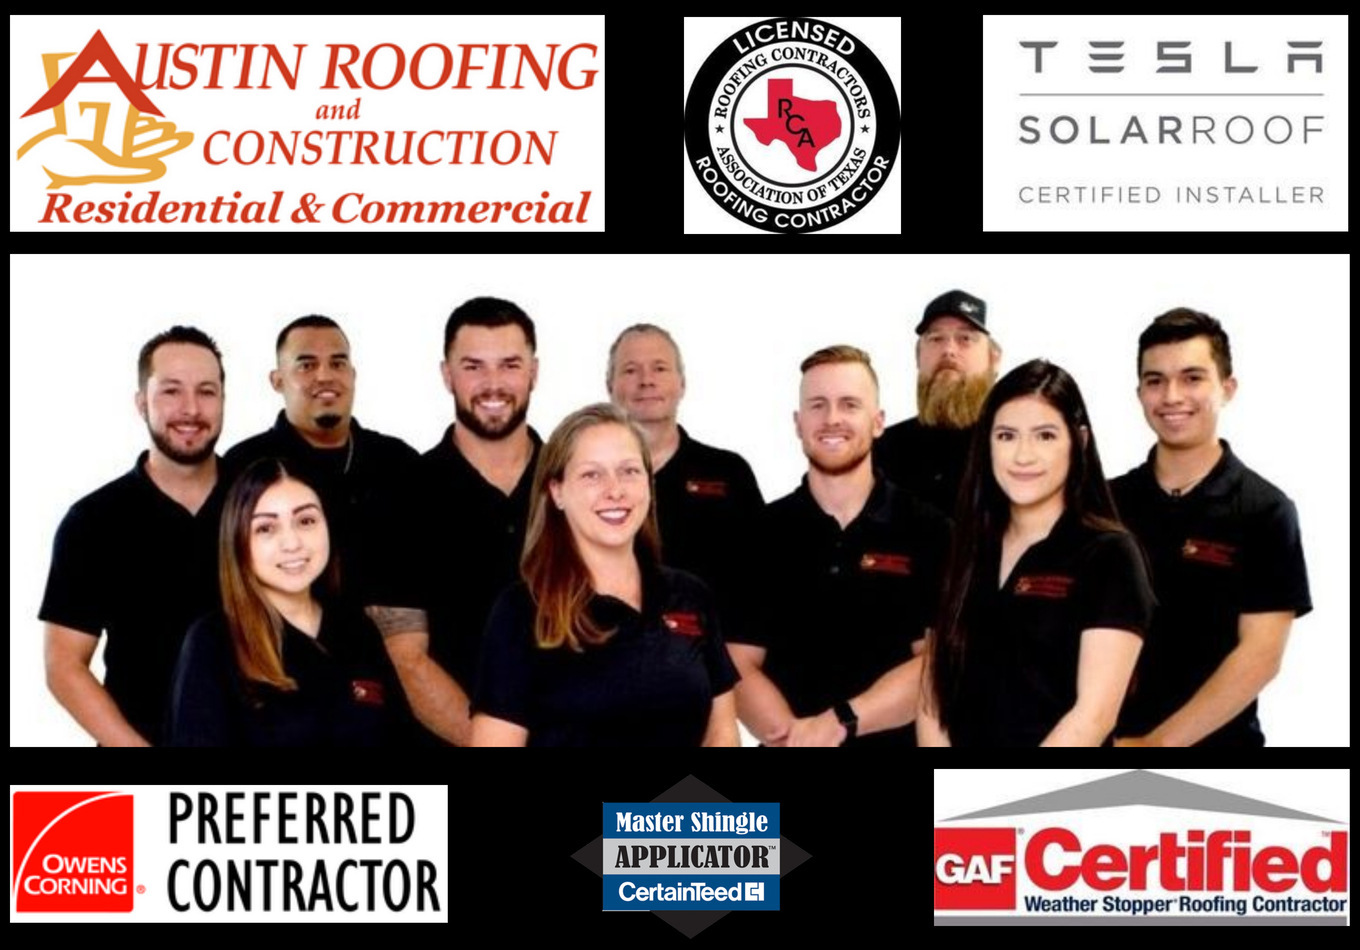 Austin Roofing and Construction, Thursday, May 13, 2021, Press release picture